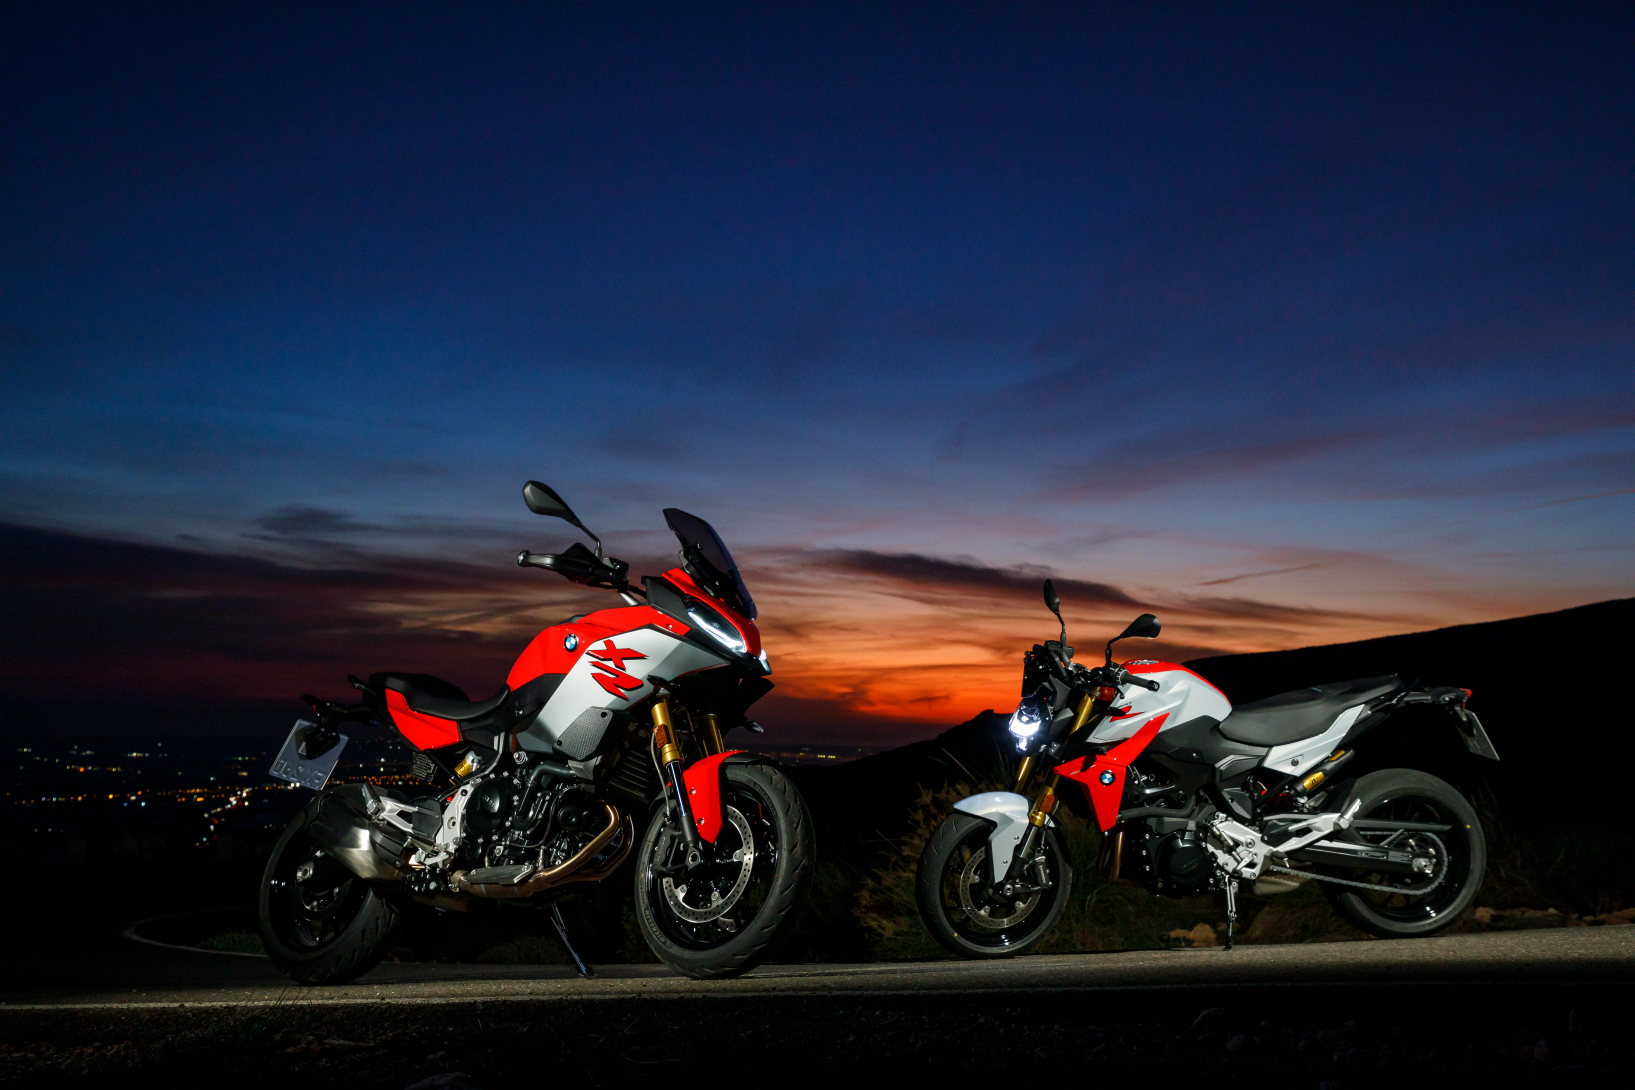 <p>BMW Motorrad is all set to launch the F 900 R and F 900 XR motorcycles in India</p>